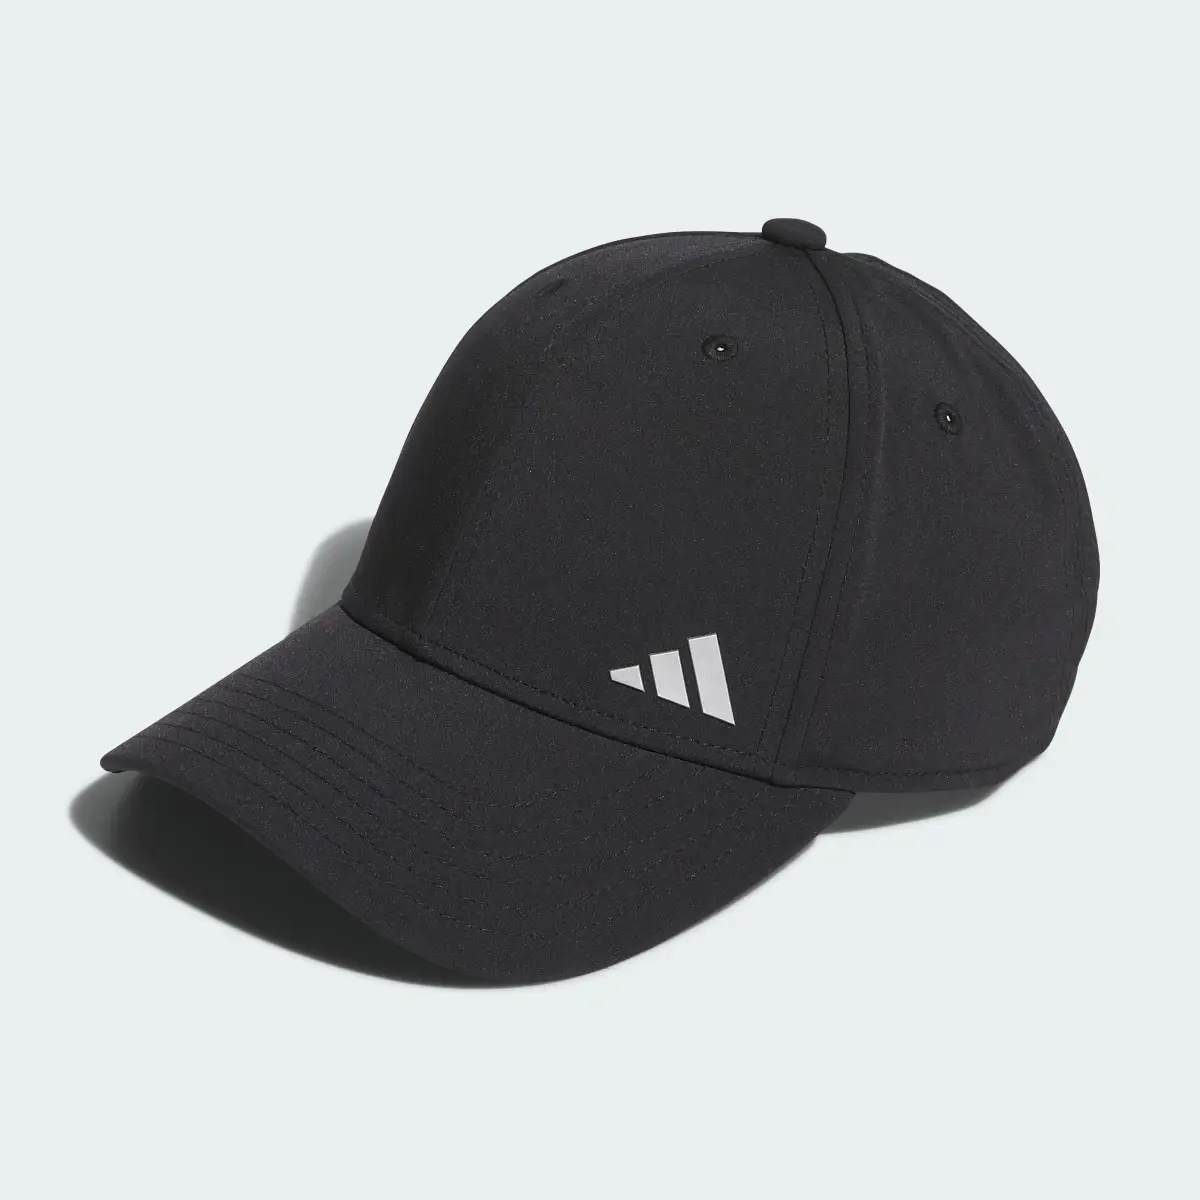 Adidas Backless 2 Hat. 1